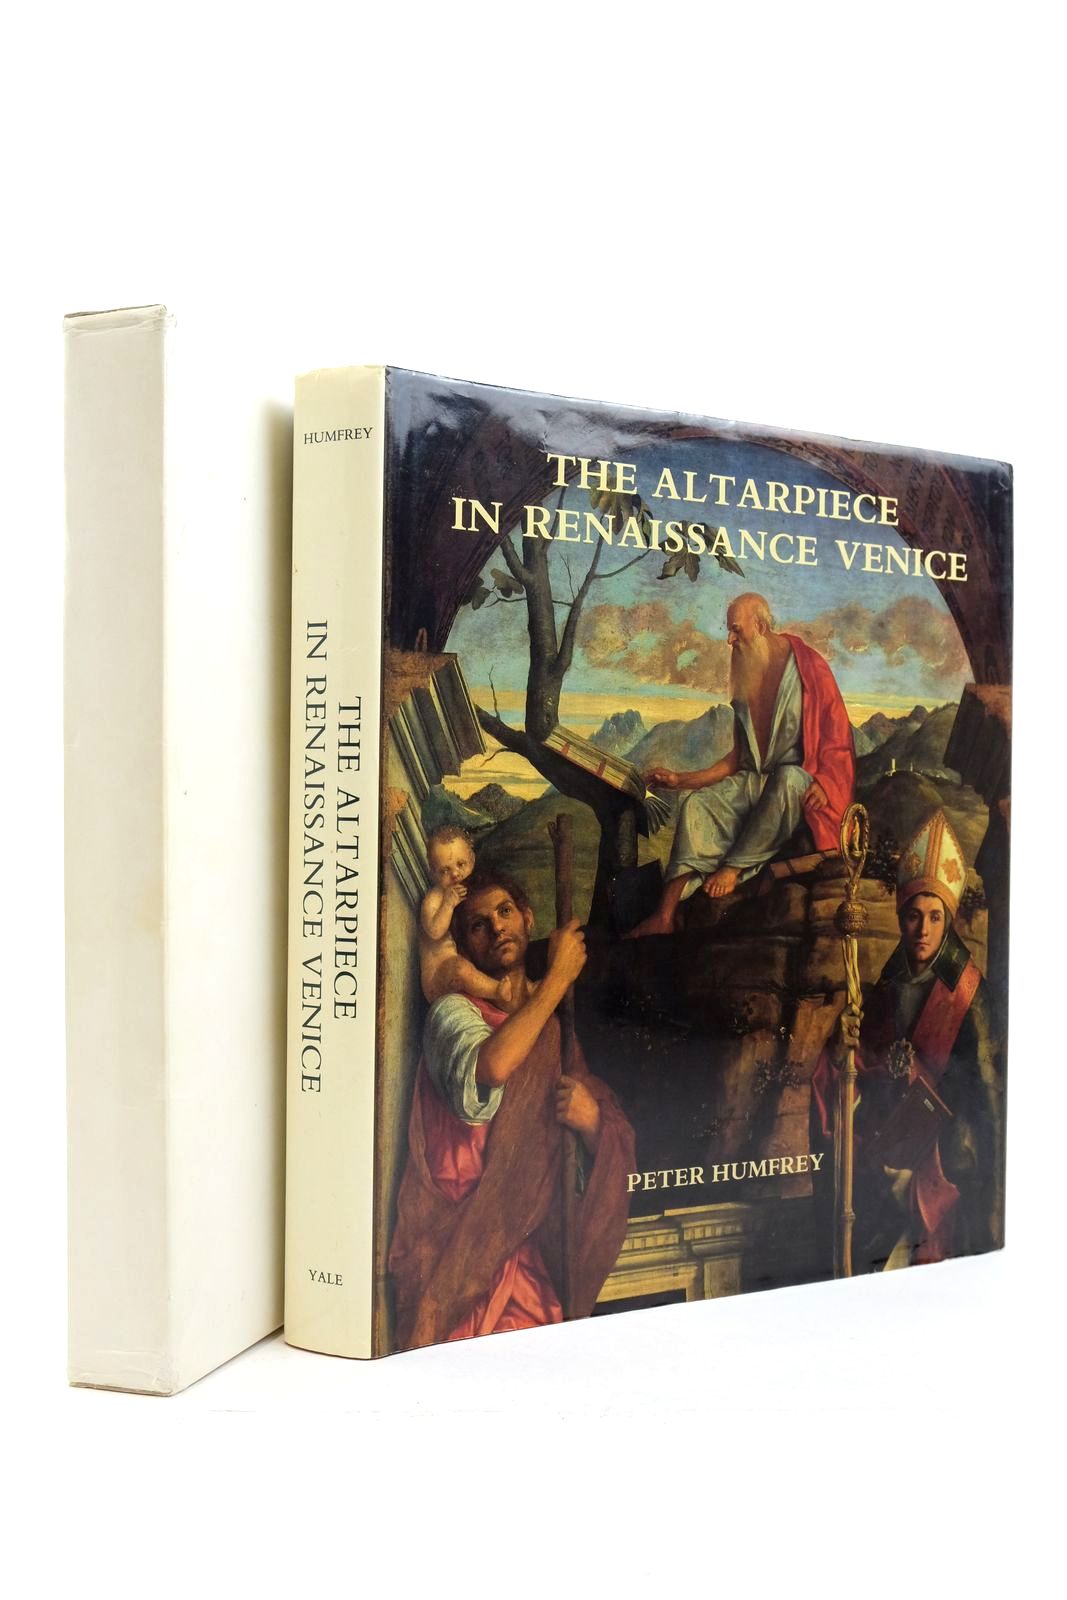 Photo of THE ALTARPIECE IN RENAISSANCE VENICE written by Humfrey, Peter published by Yale University Press (STOCK CODE: 2138979)  for sale by Stella & Rose's Books